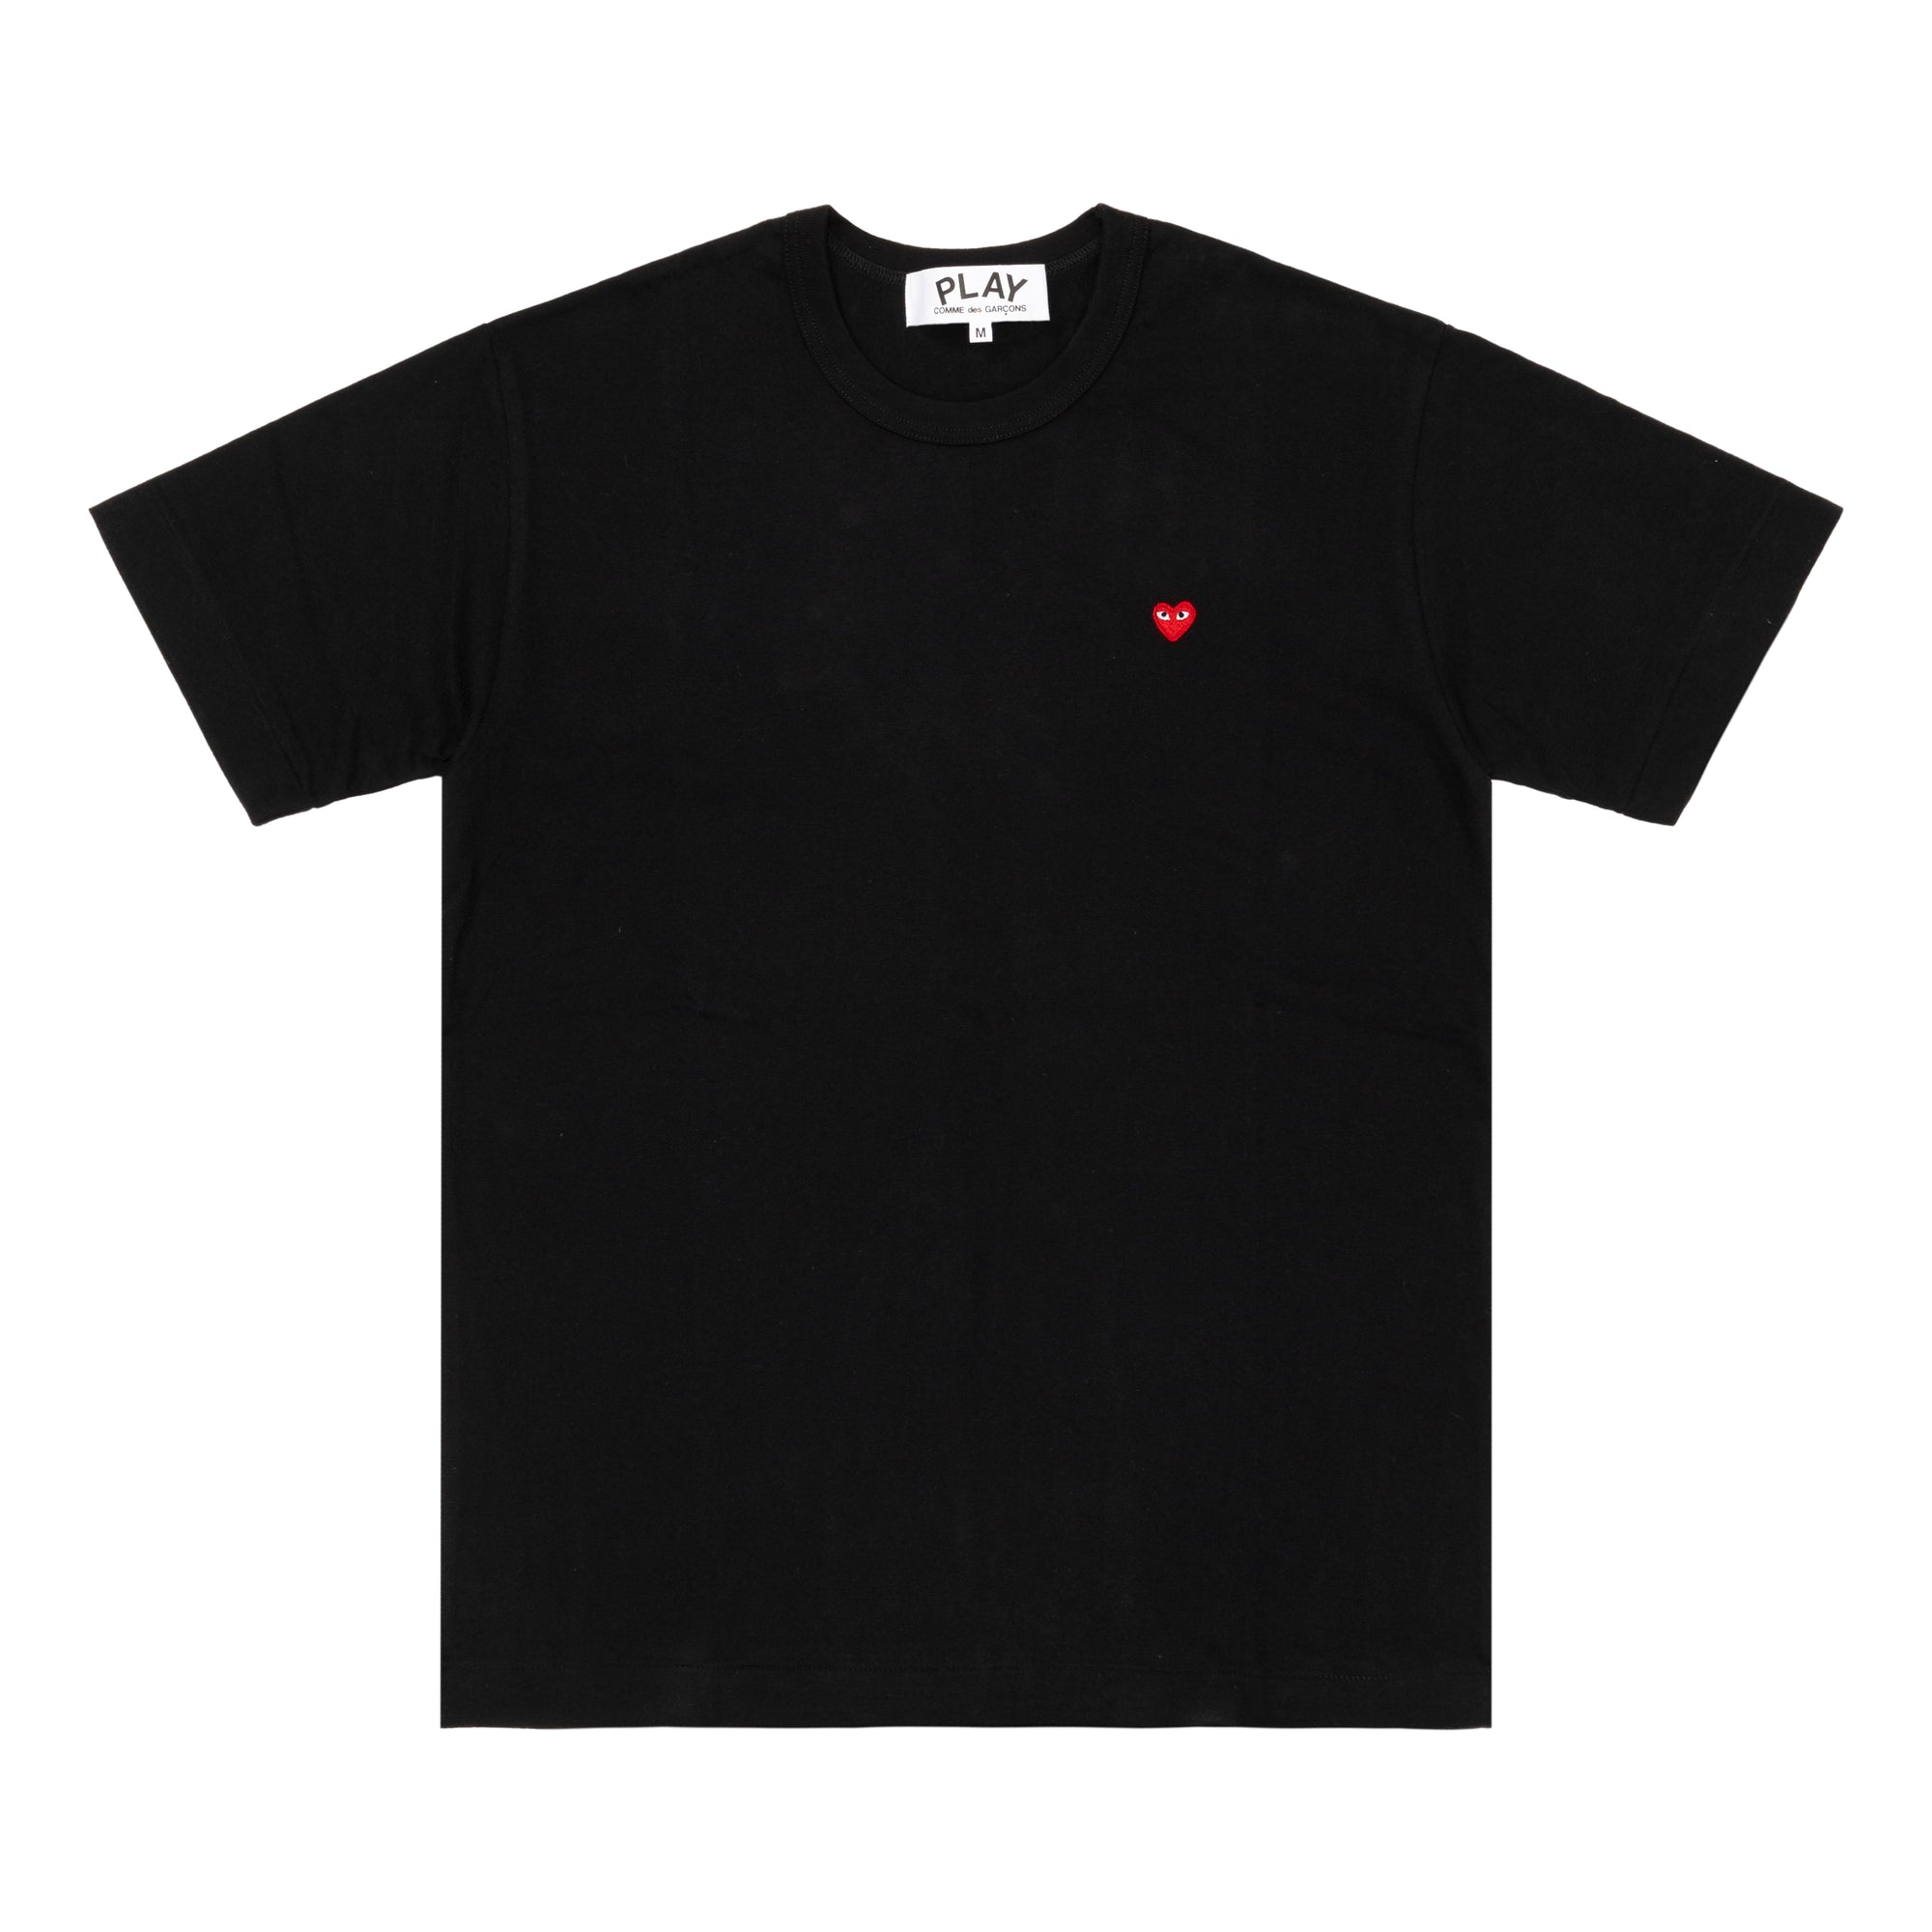 PLAY CDG - T-SHIRT WITH SMALL RED HEART - (BLACK) view 1